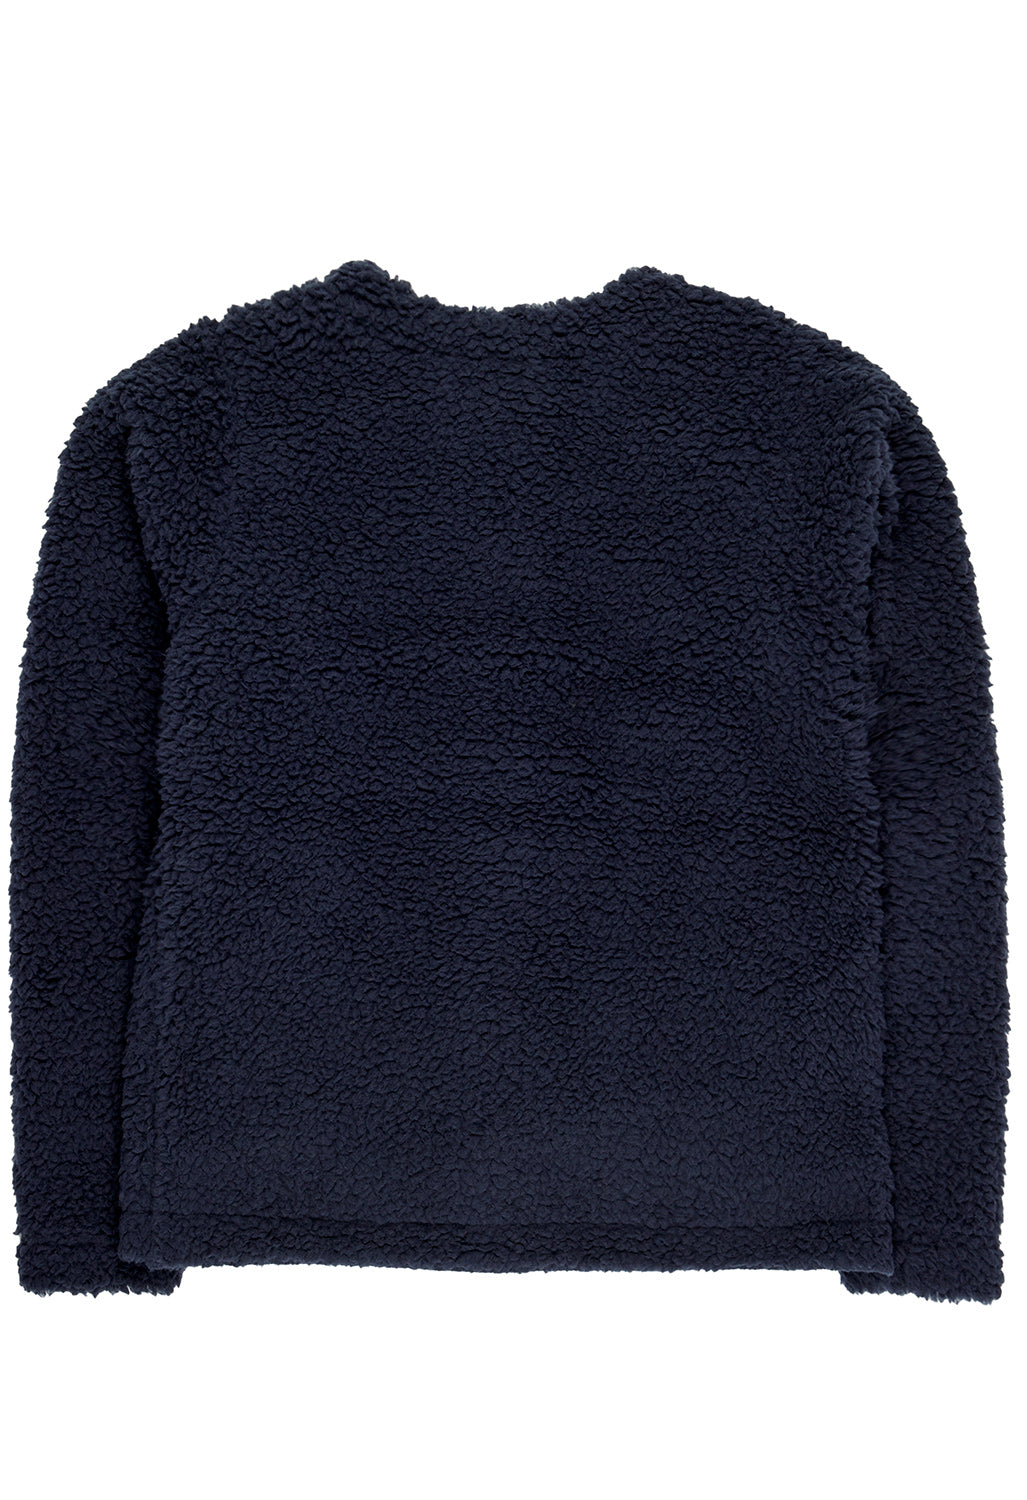 Montbell Women's Climaplus Shearling Cardigan - Navy